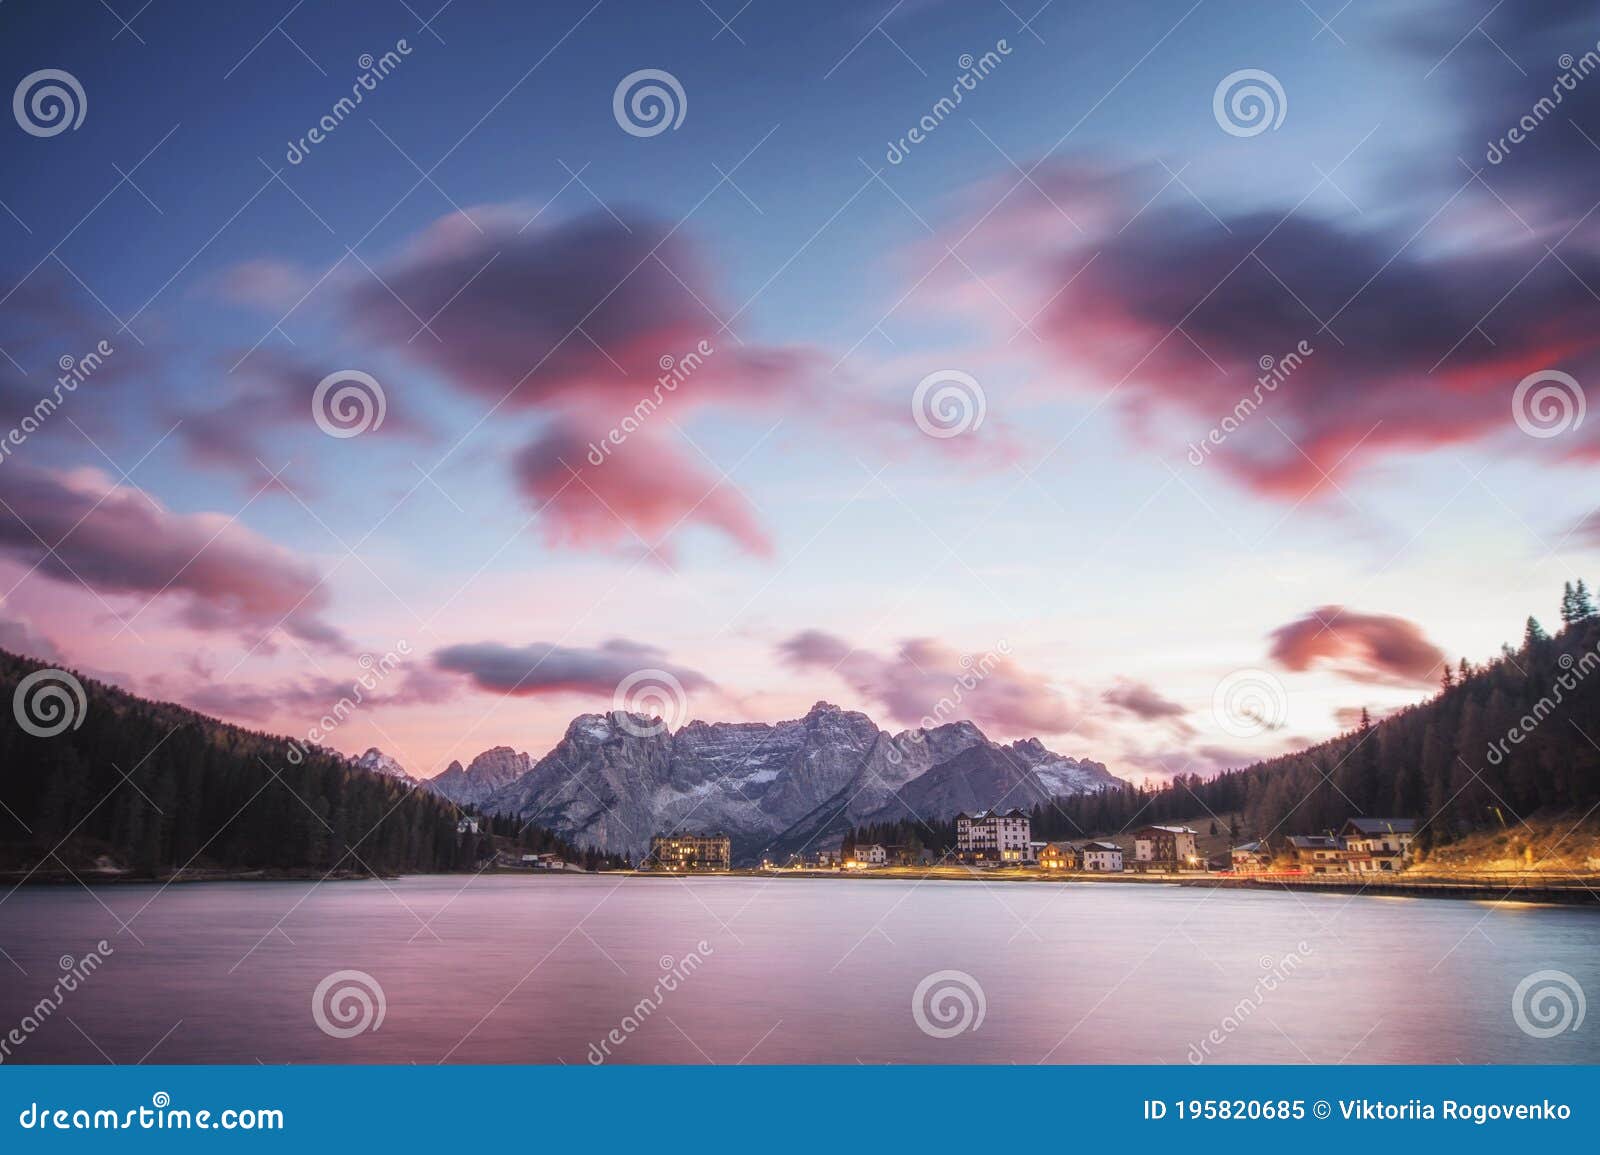 famous tourist place lake lago di misurina on sunset. picture with long e[posure and amazing dramatic sky